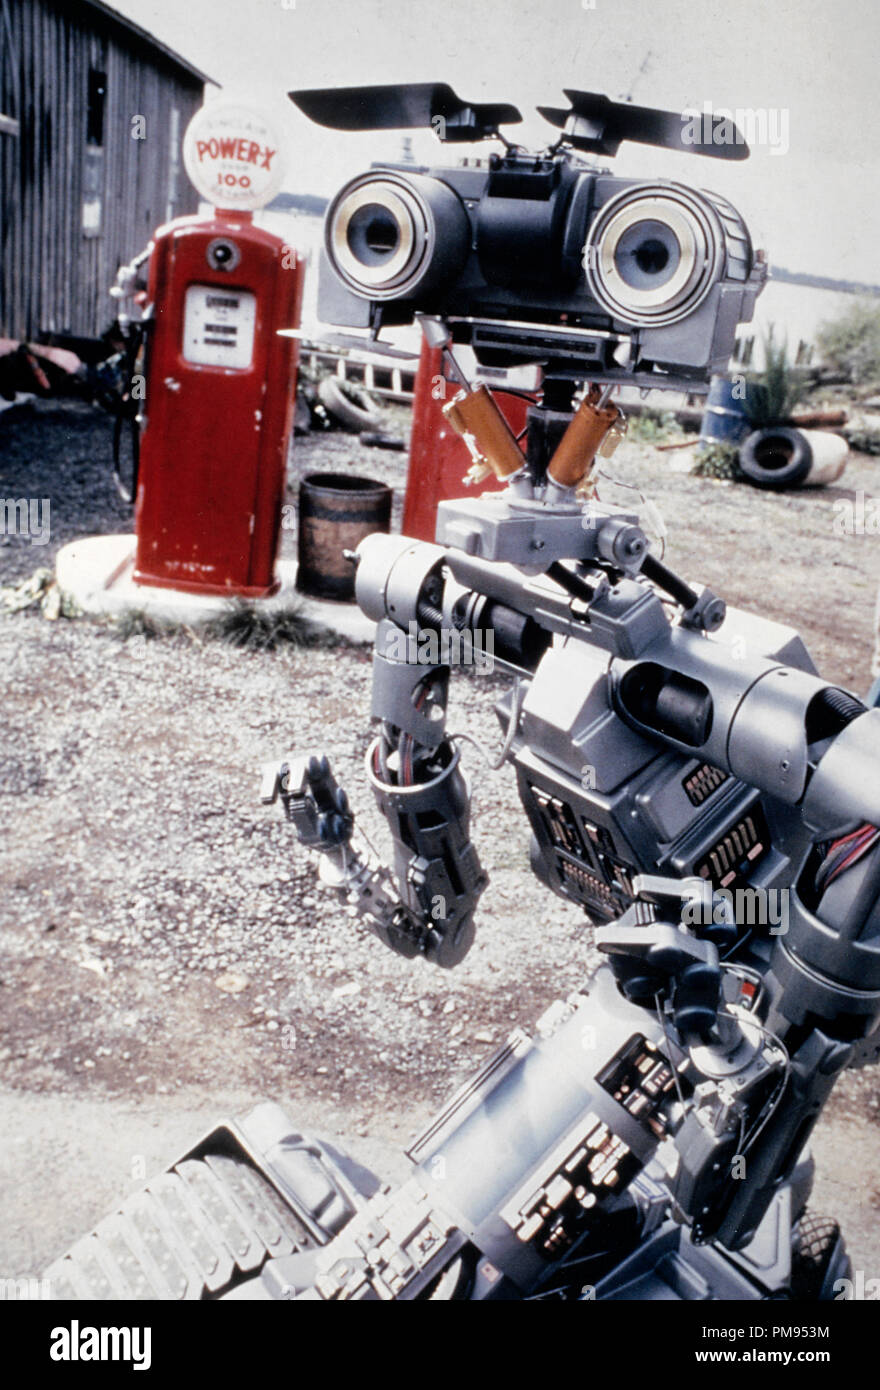 Studio Publicity Still from 'Short Circuit' Scene still with Robot © 1986 Tri Star  All Rights Reserved   File Reference # 31700109THA  For Editorial Use Only Stock Photo